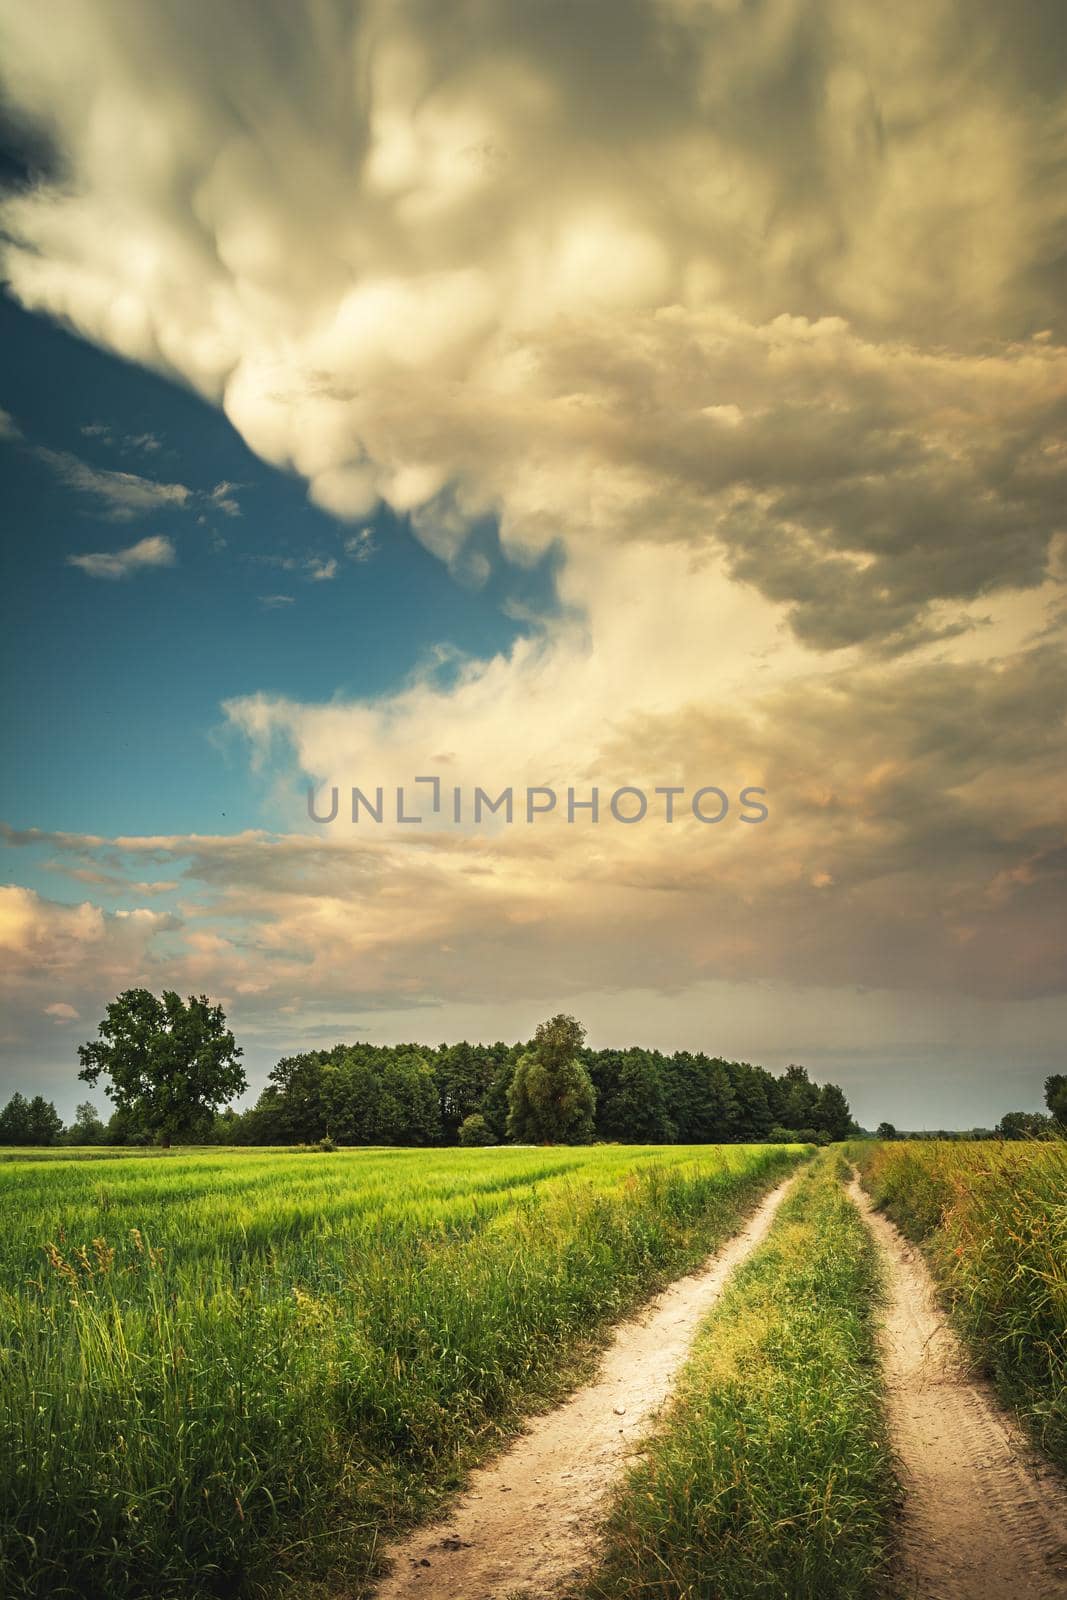 Rural road through the field and fantastic clouds on the sky by darekb22